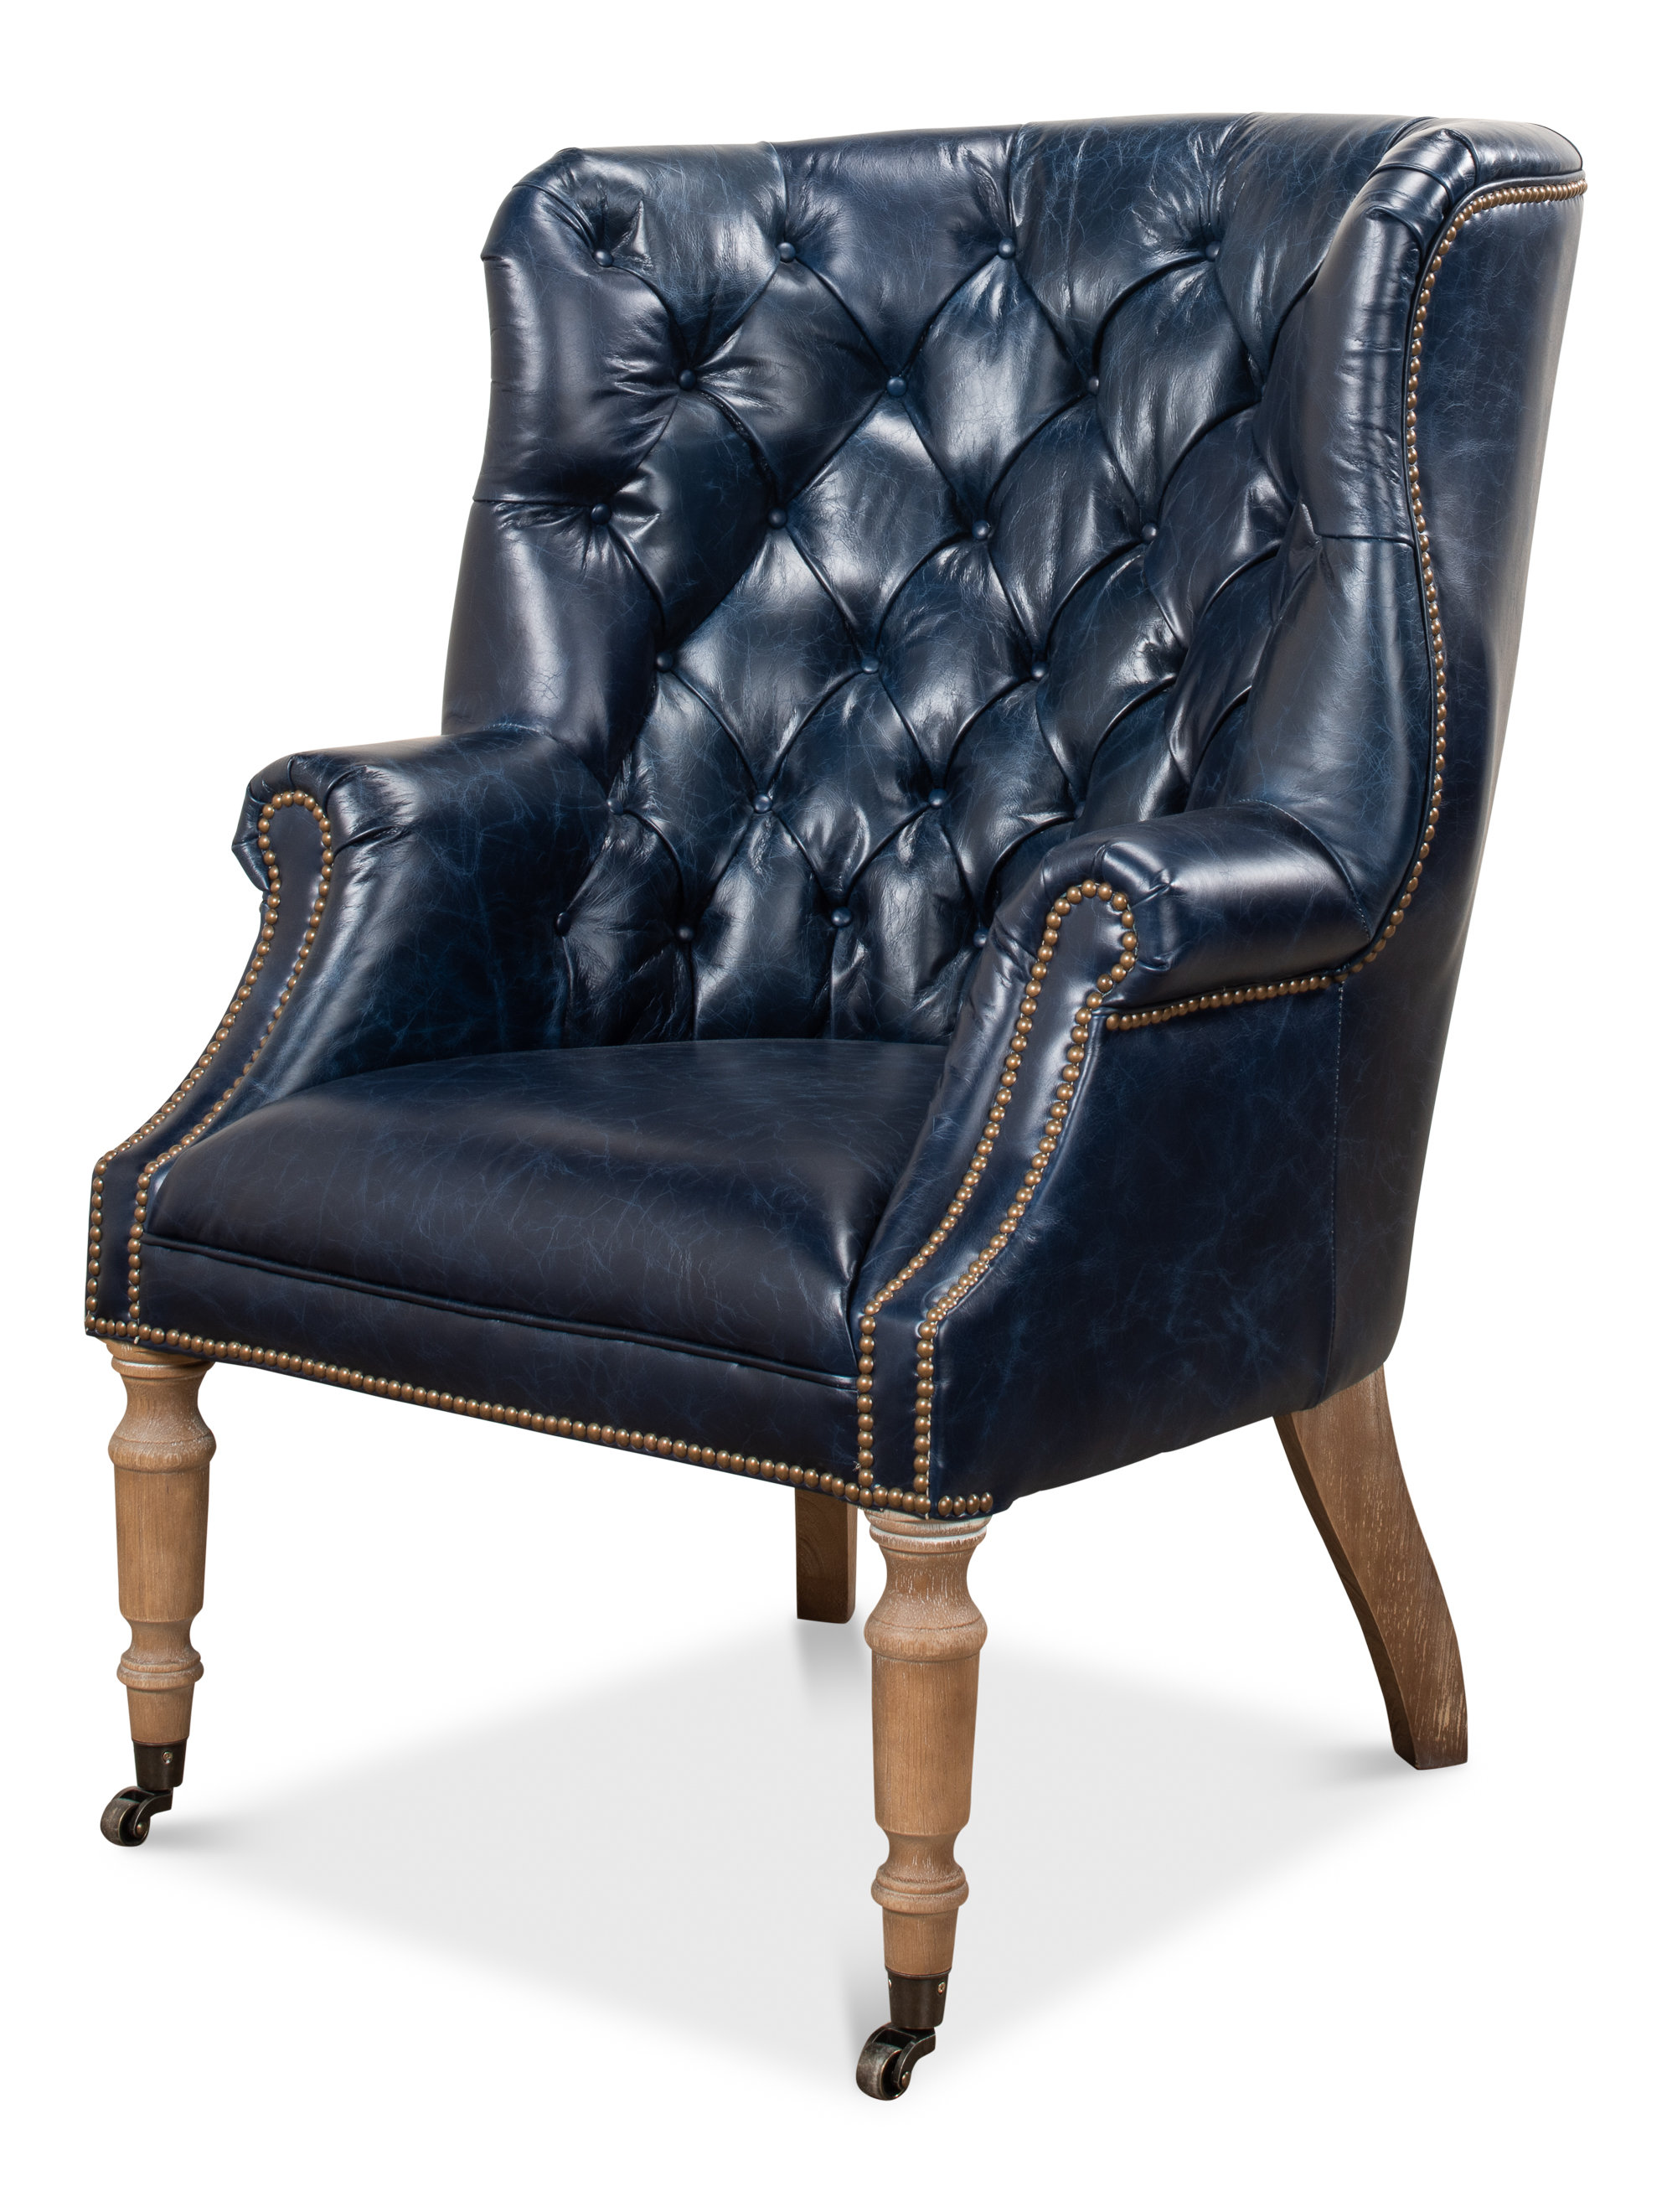 Astoria Grand Morford 30 Wide Tufted Genuine Leather Top Grain Leather Wingback Chair Wayfair